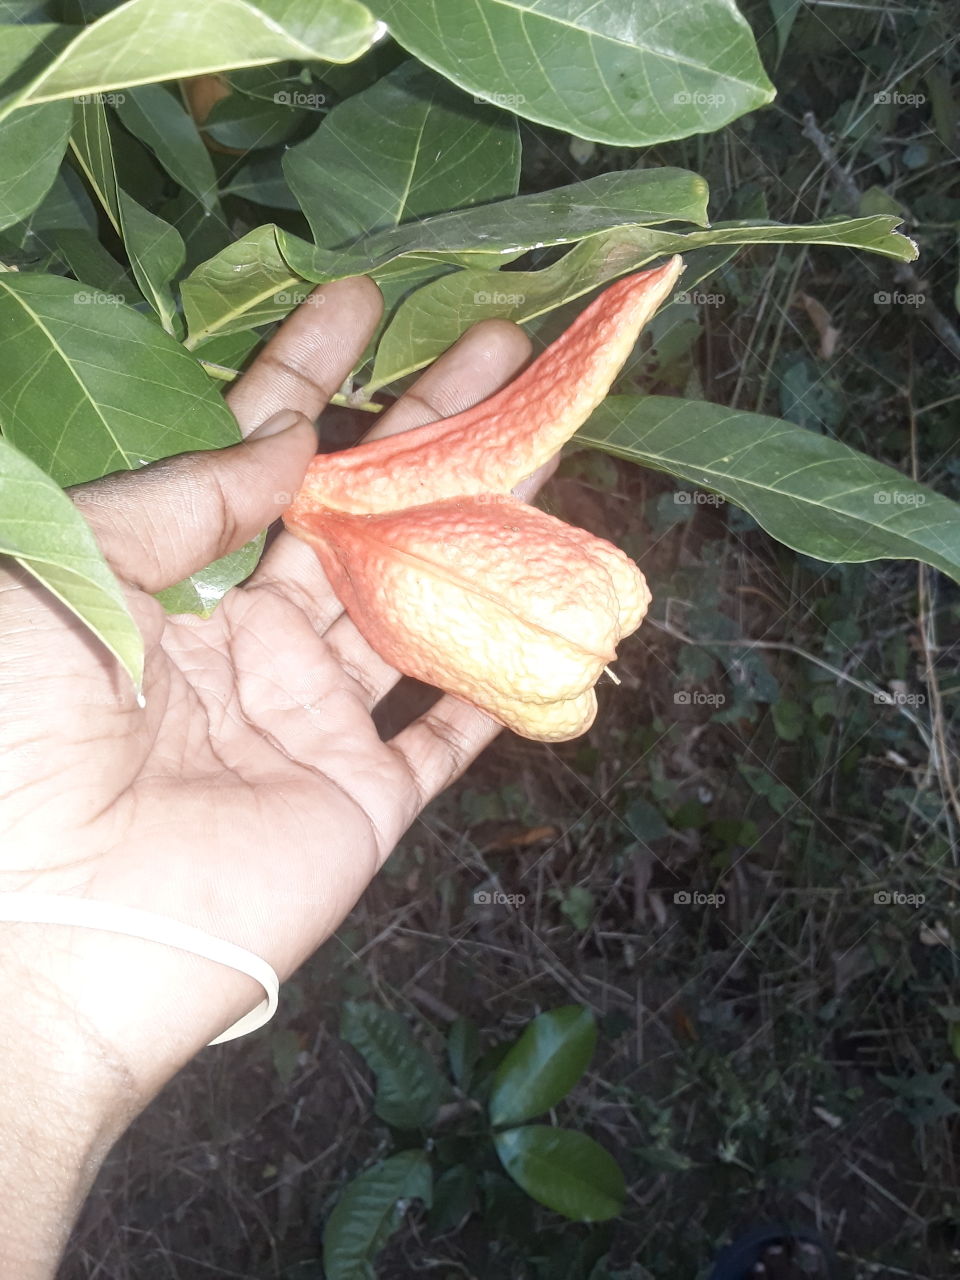 A thumbs up for Jamaica's national fruit